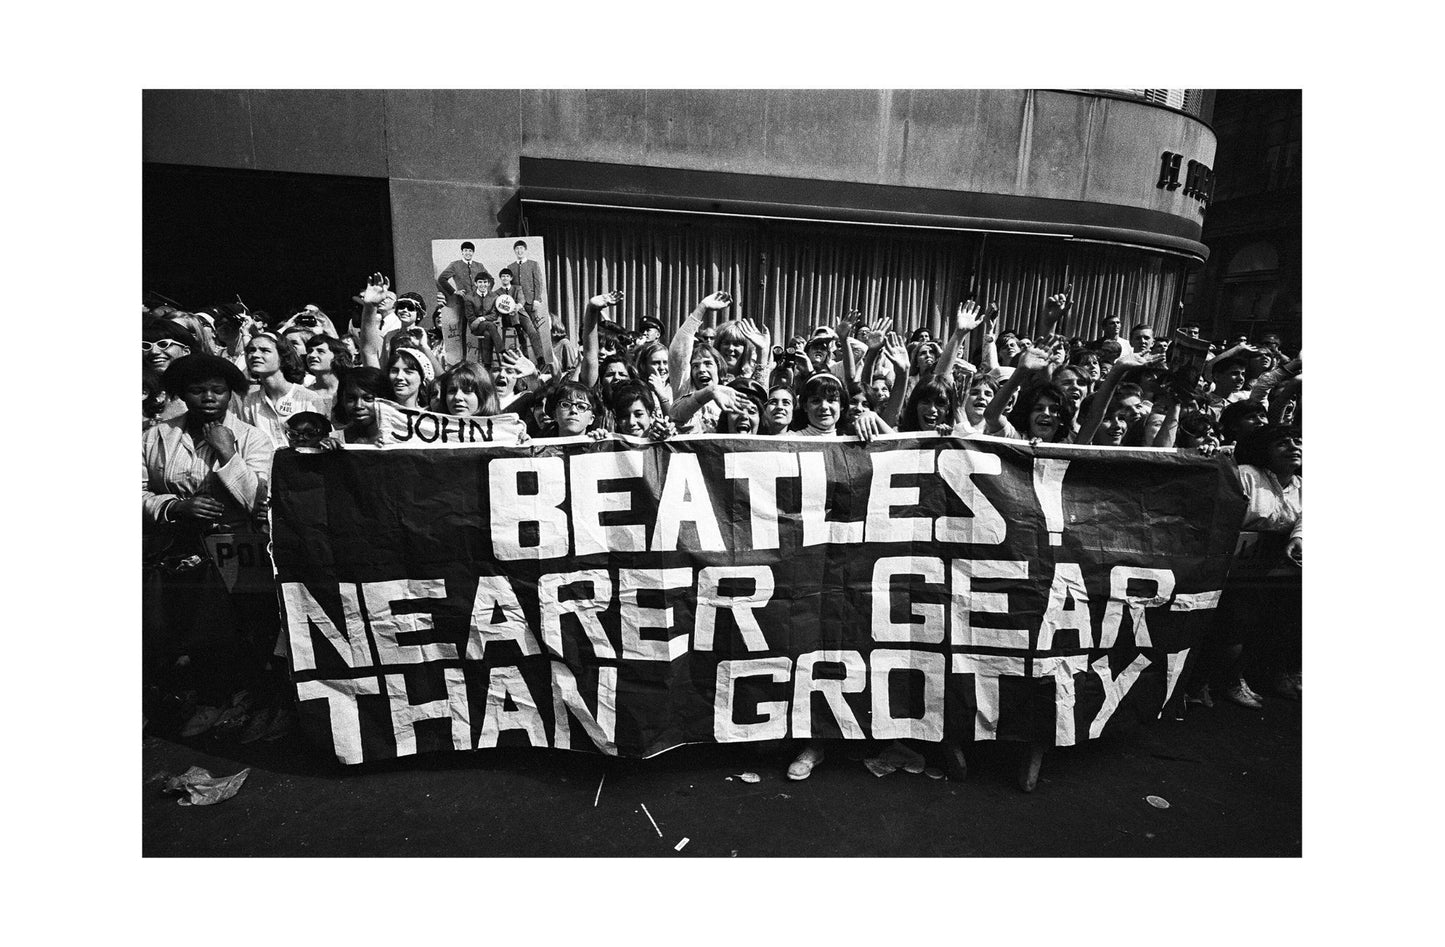 The Beatles - American Fans Cheering, USA, 1964 Print 3